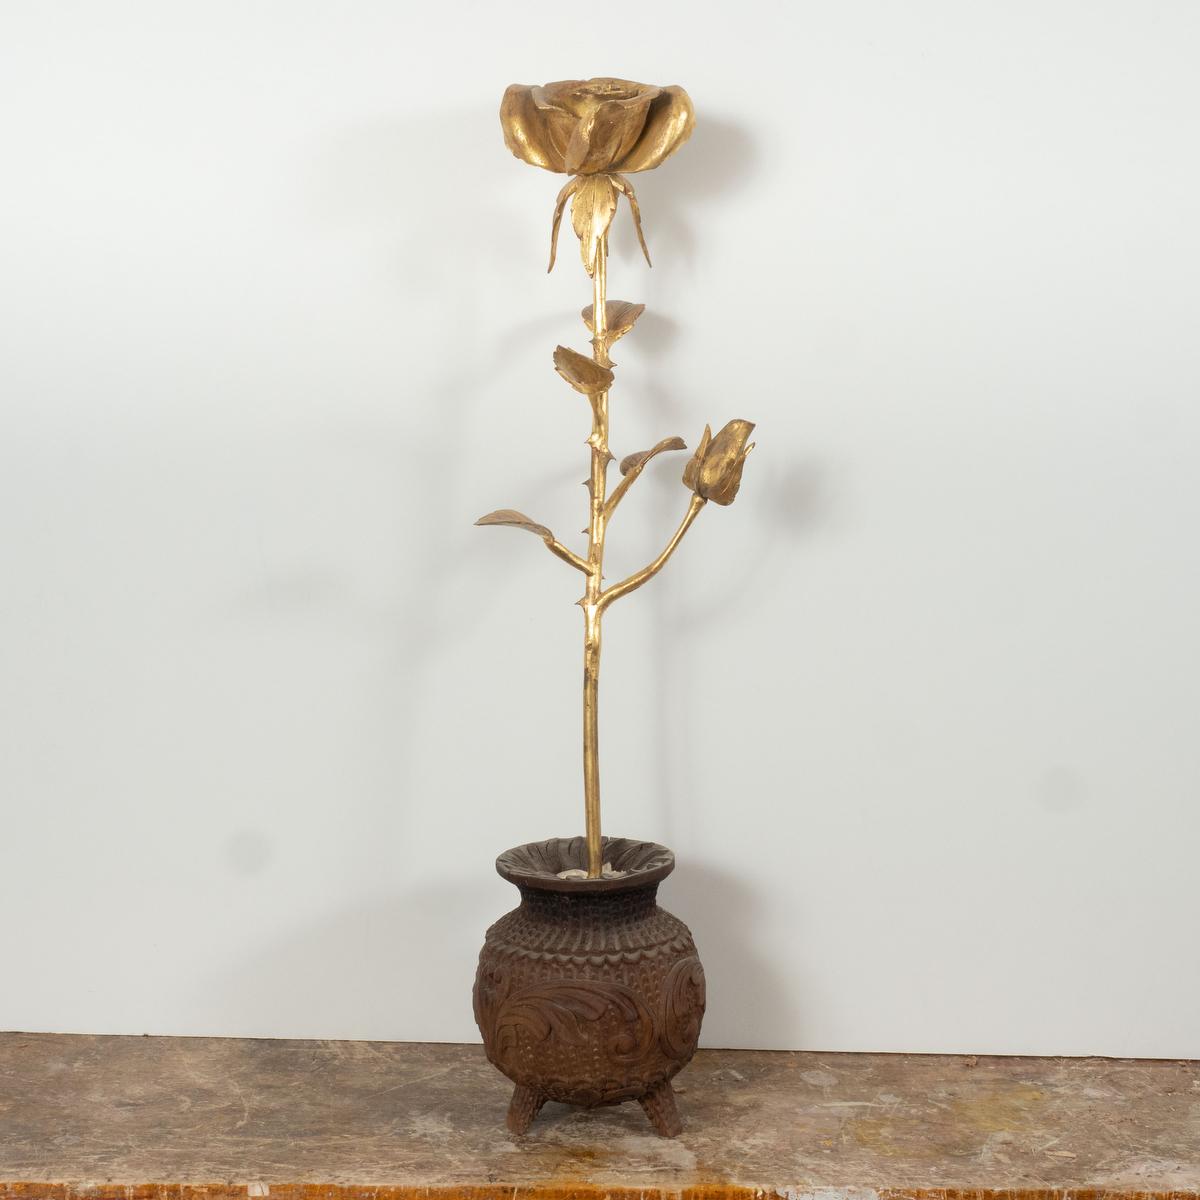 22kt gold leaf woodcarving depicting a single rose in a pot in exquisite detail by master woodworker Carlos Villegas.